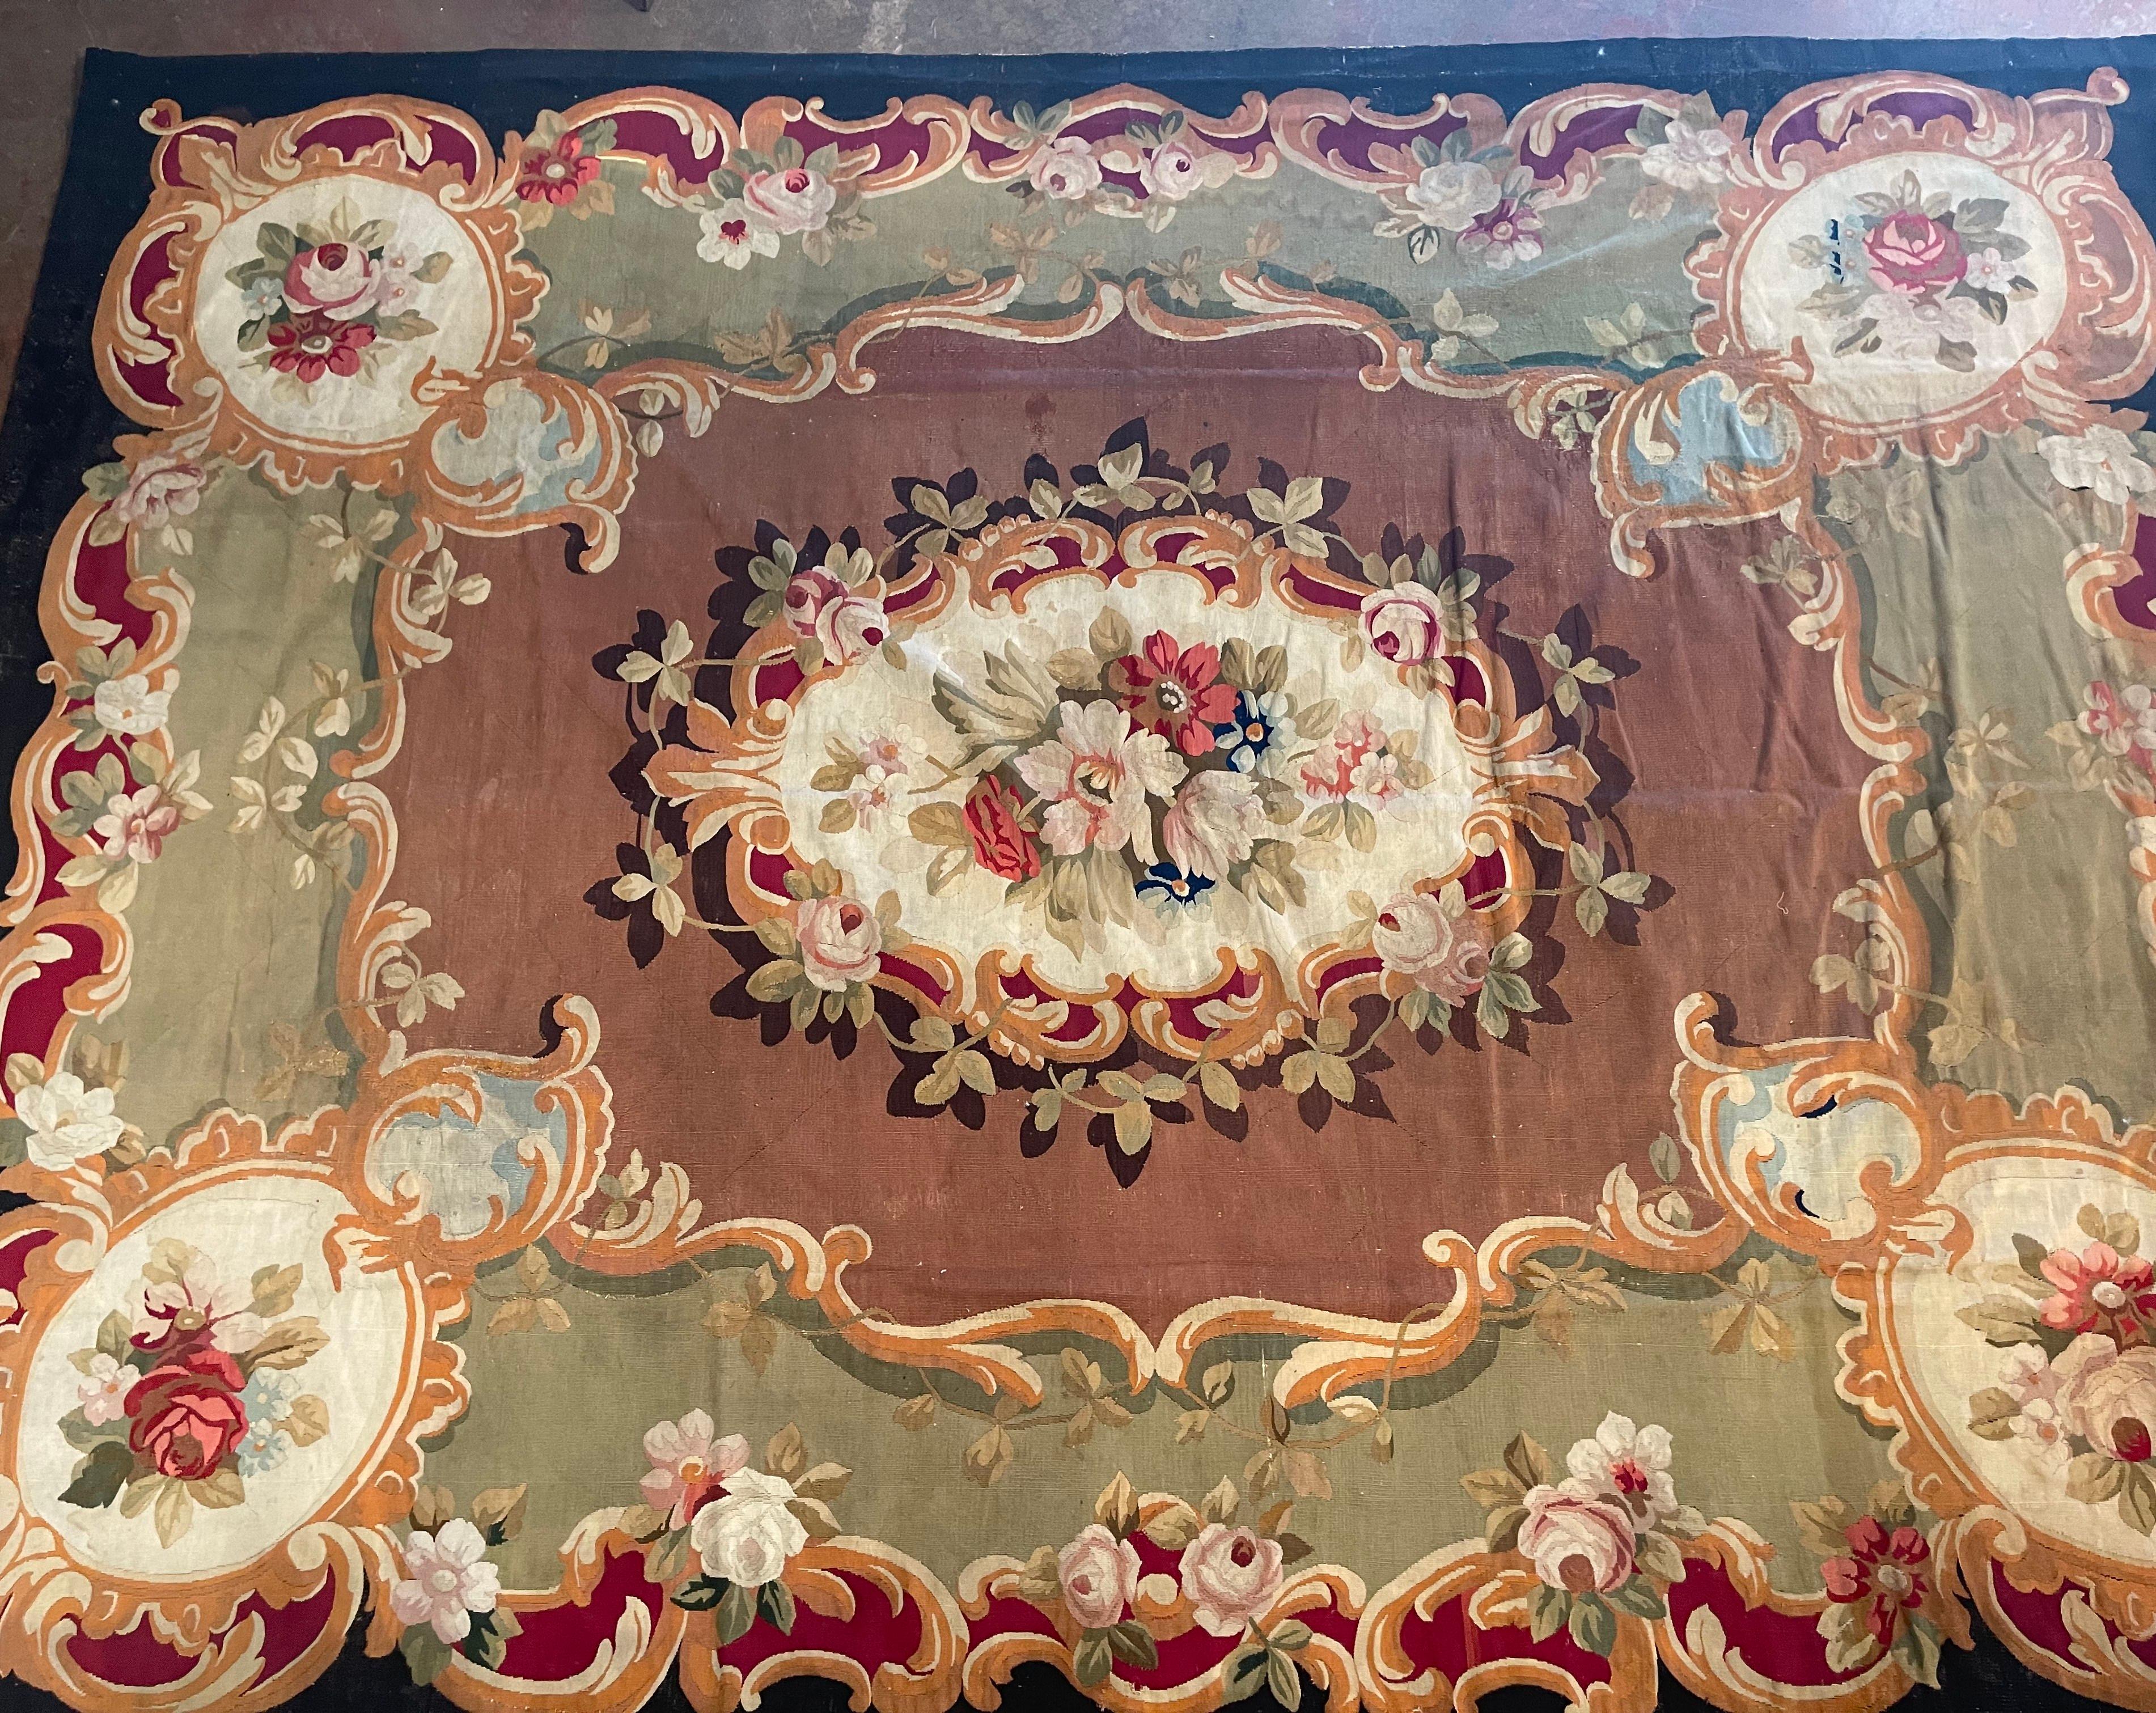 Decorate a dining room or living room with this beautifully kept antique Aubusson rug, coming straight from a chateau in southern France. Hand woven in the city of Aubusson circa 1870, the 13 x 10 colorful carpet features scroll and floral motifs